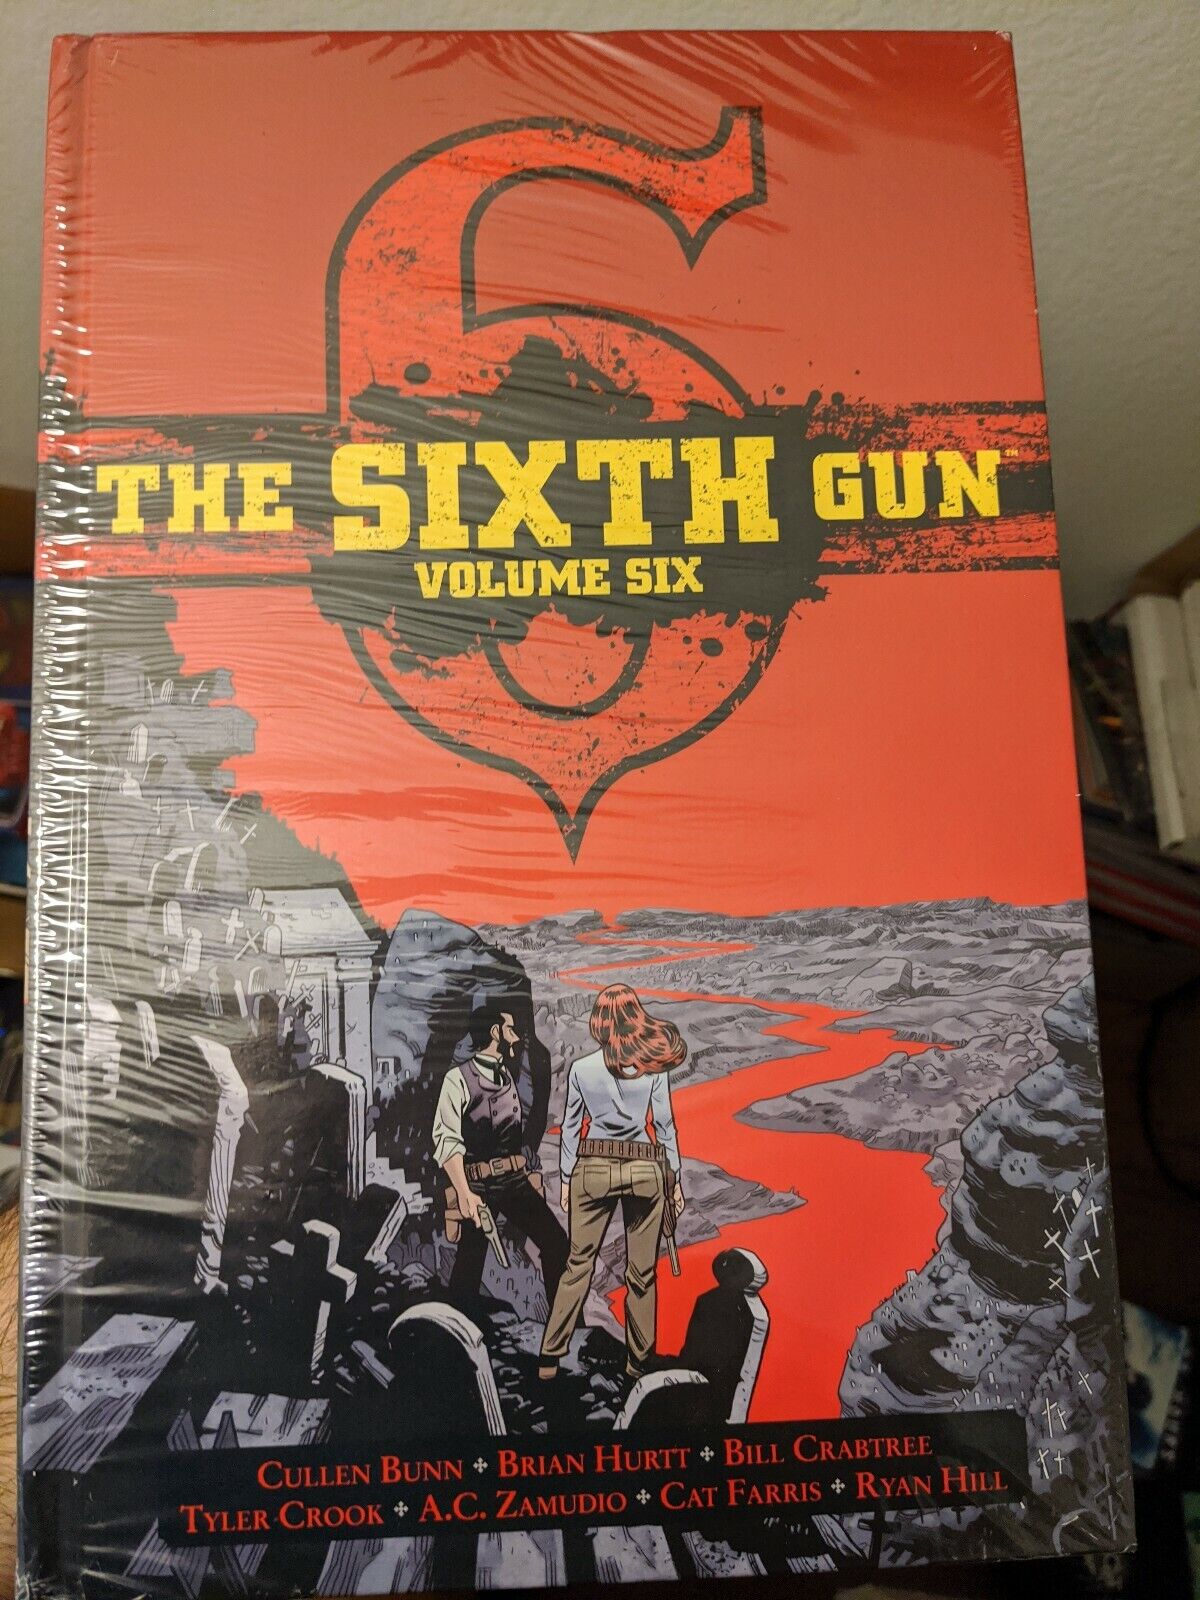 The Sixth Gun Volume 6 Deluxe Sealed/NEW *OOP* *RARE* *HTF*